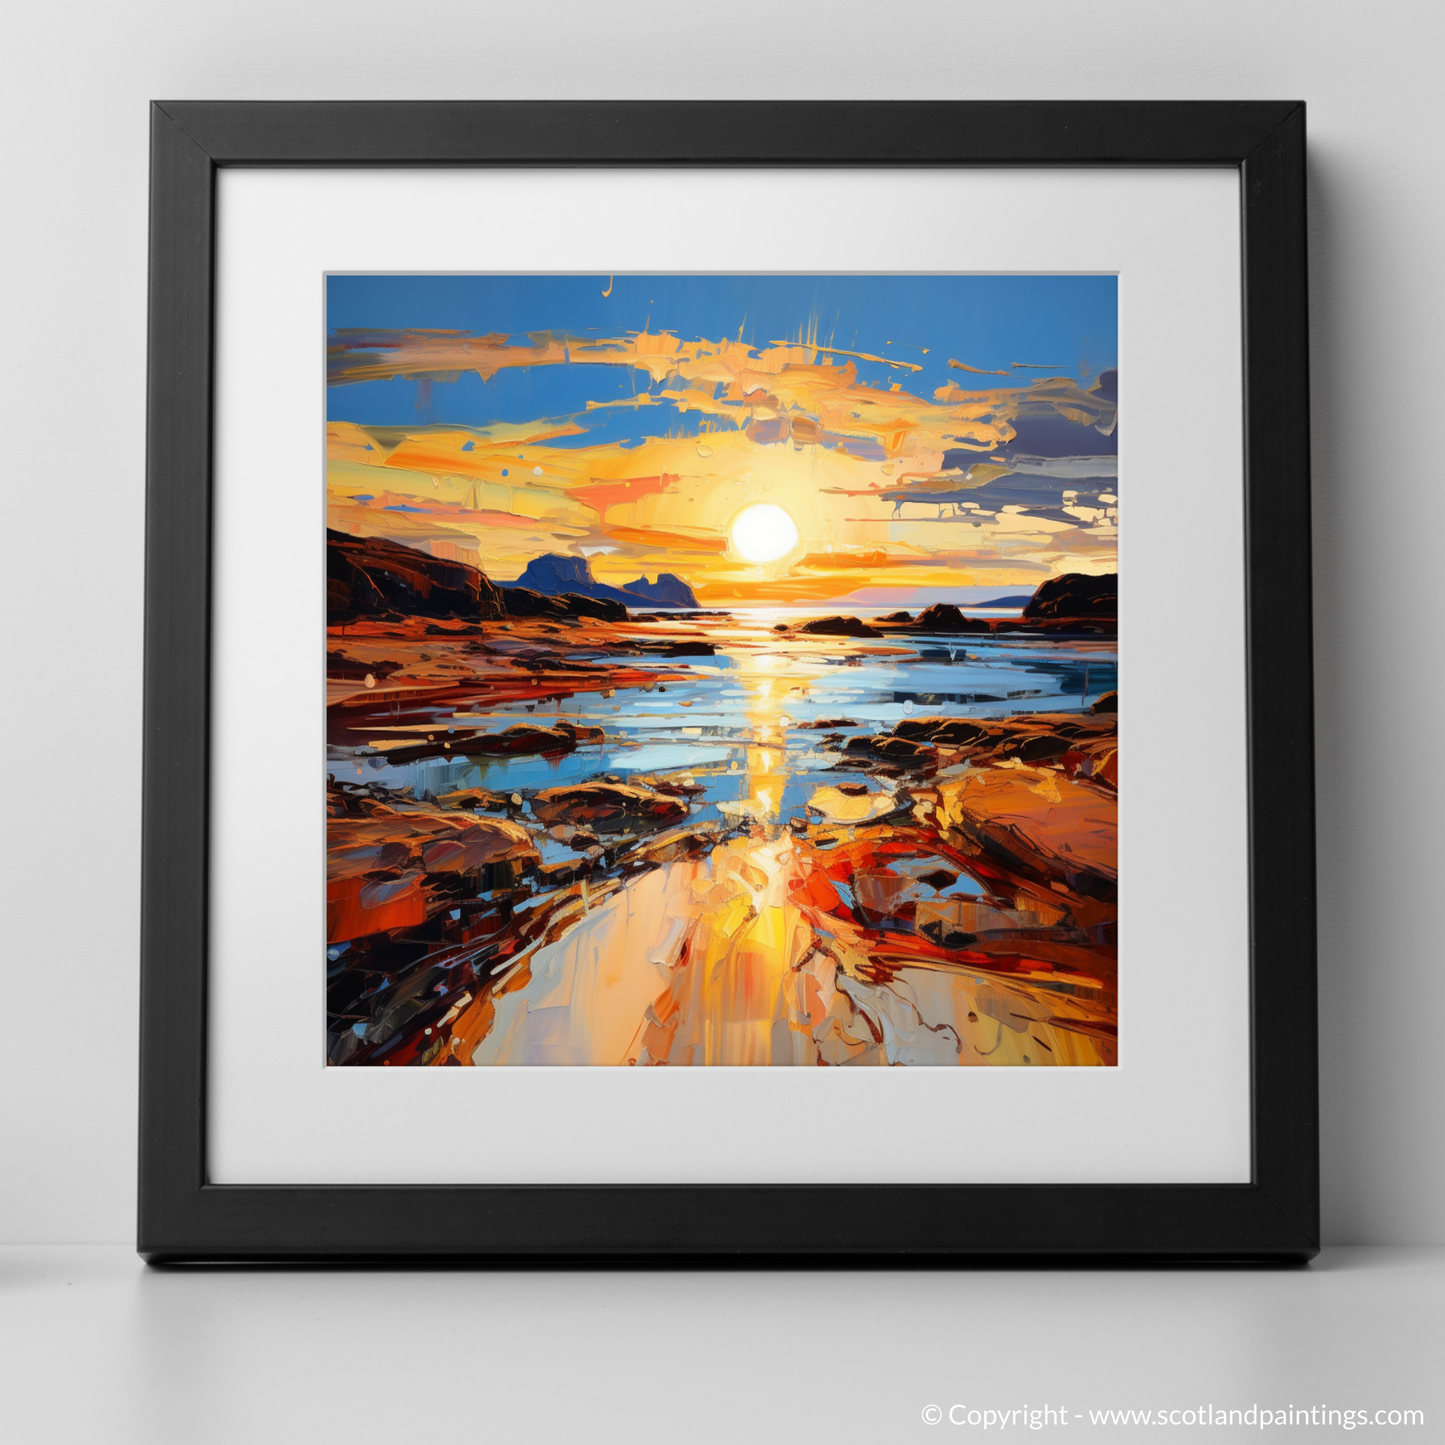 Art Print of Sound of Iona at golden hour with a black frame